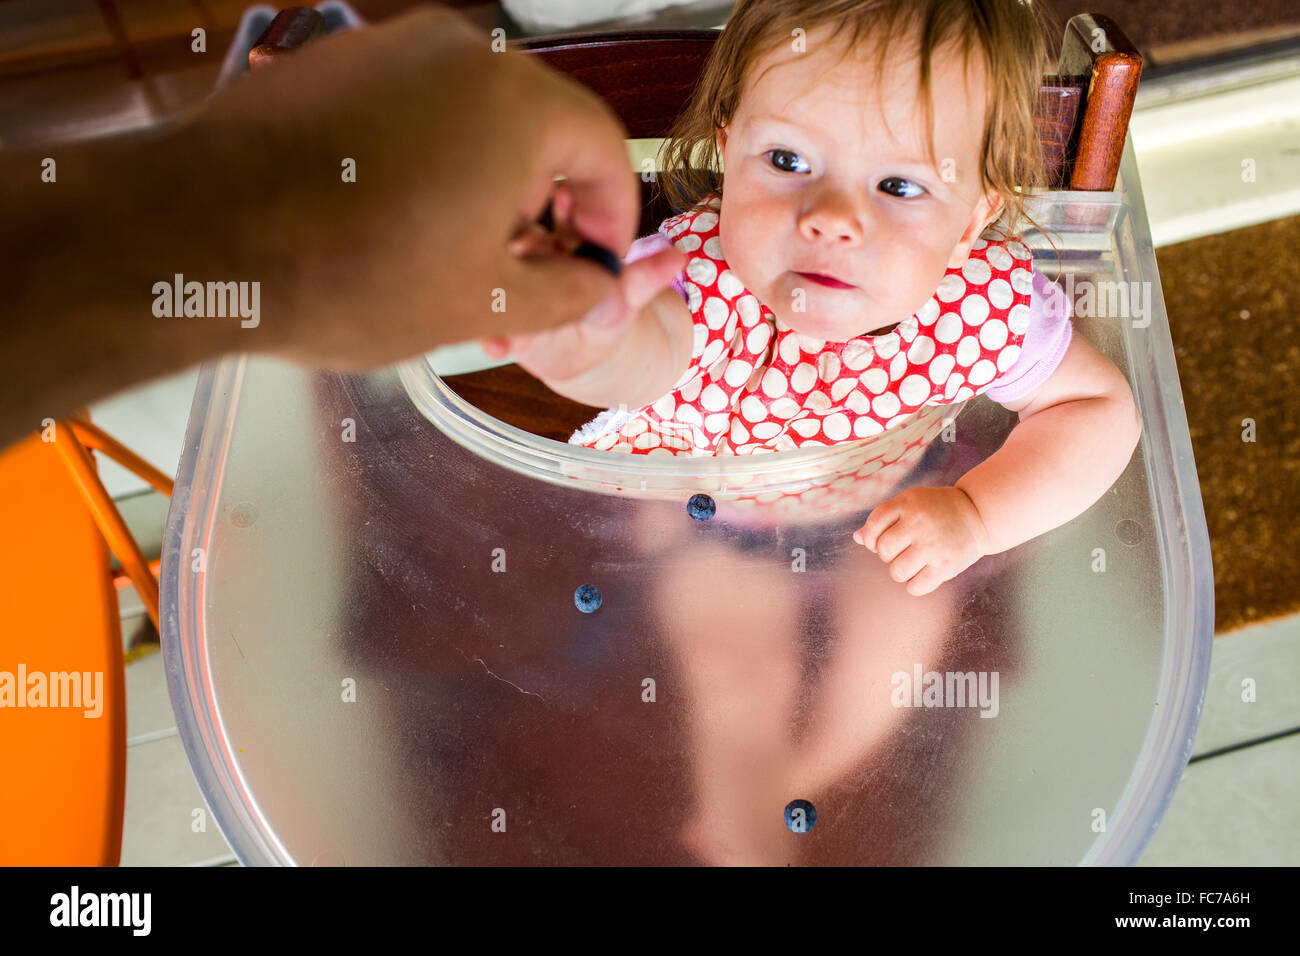 Father feeding baby girl in high chair Stock Photo